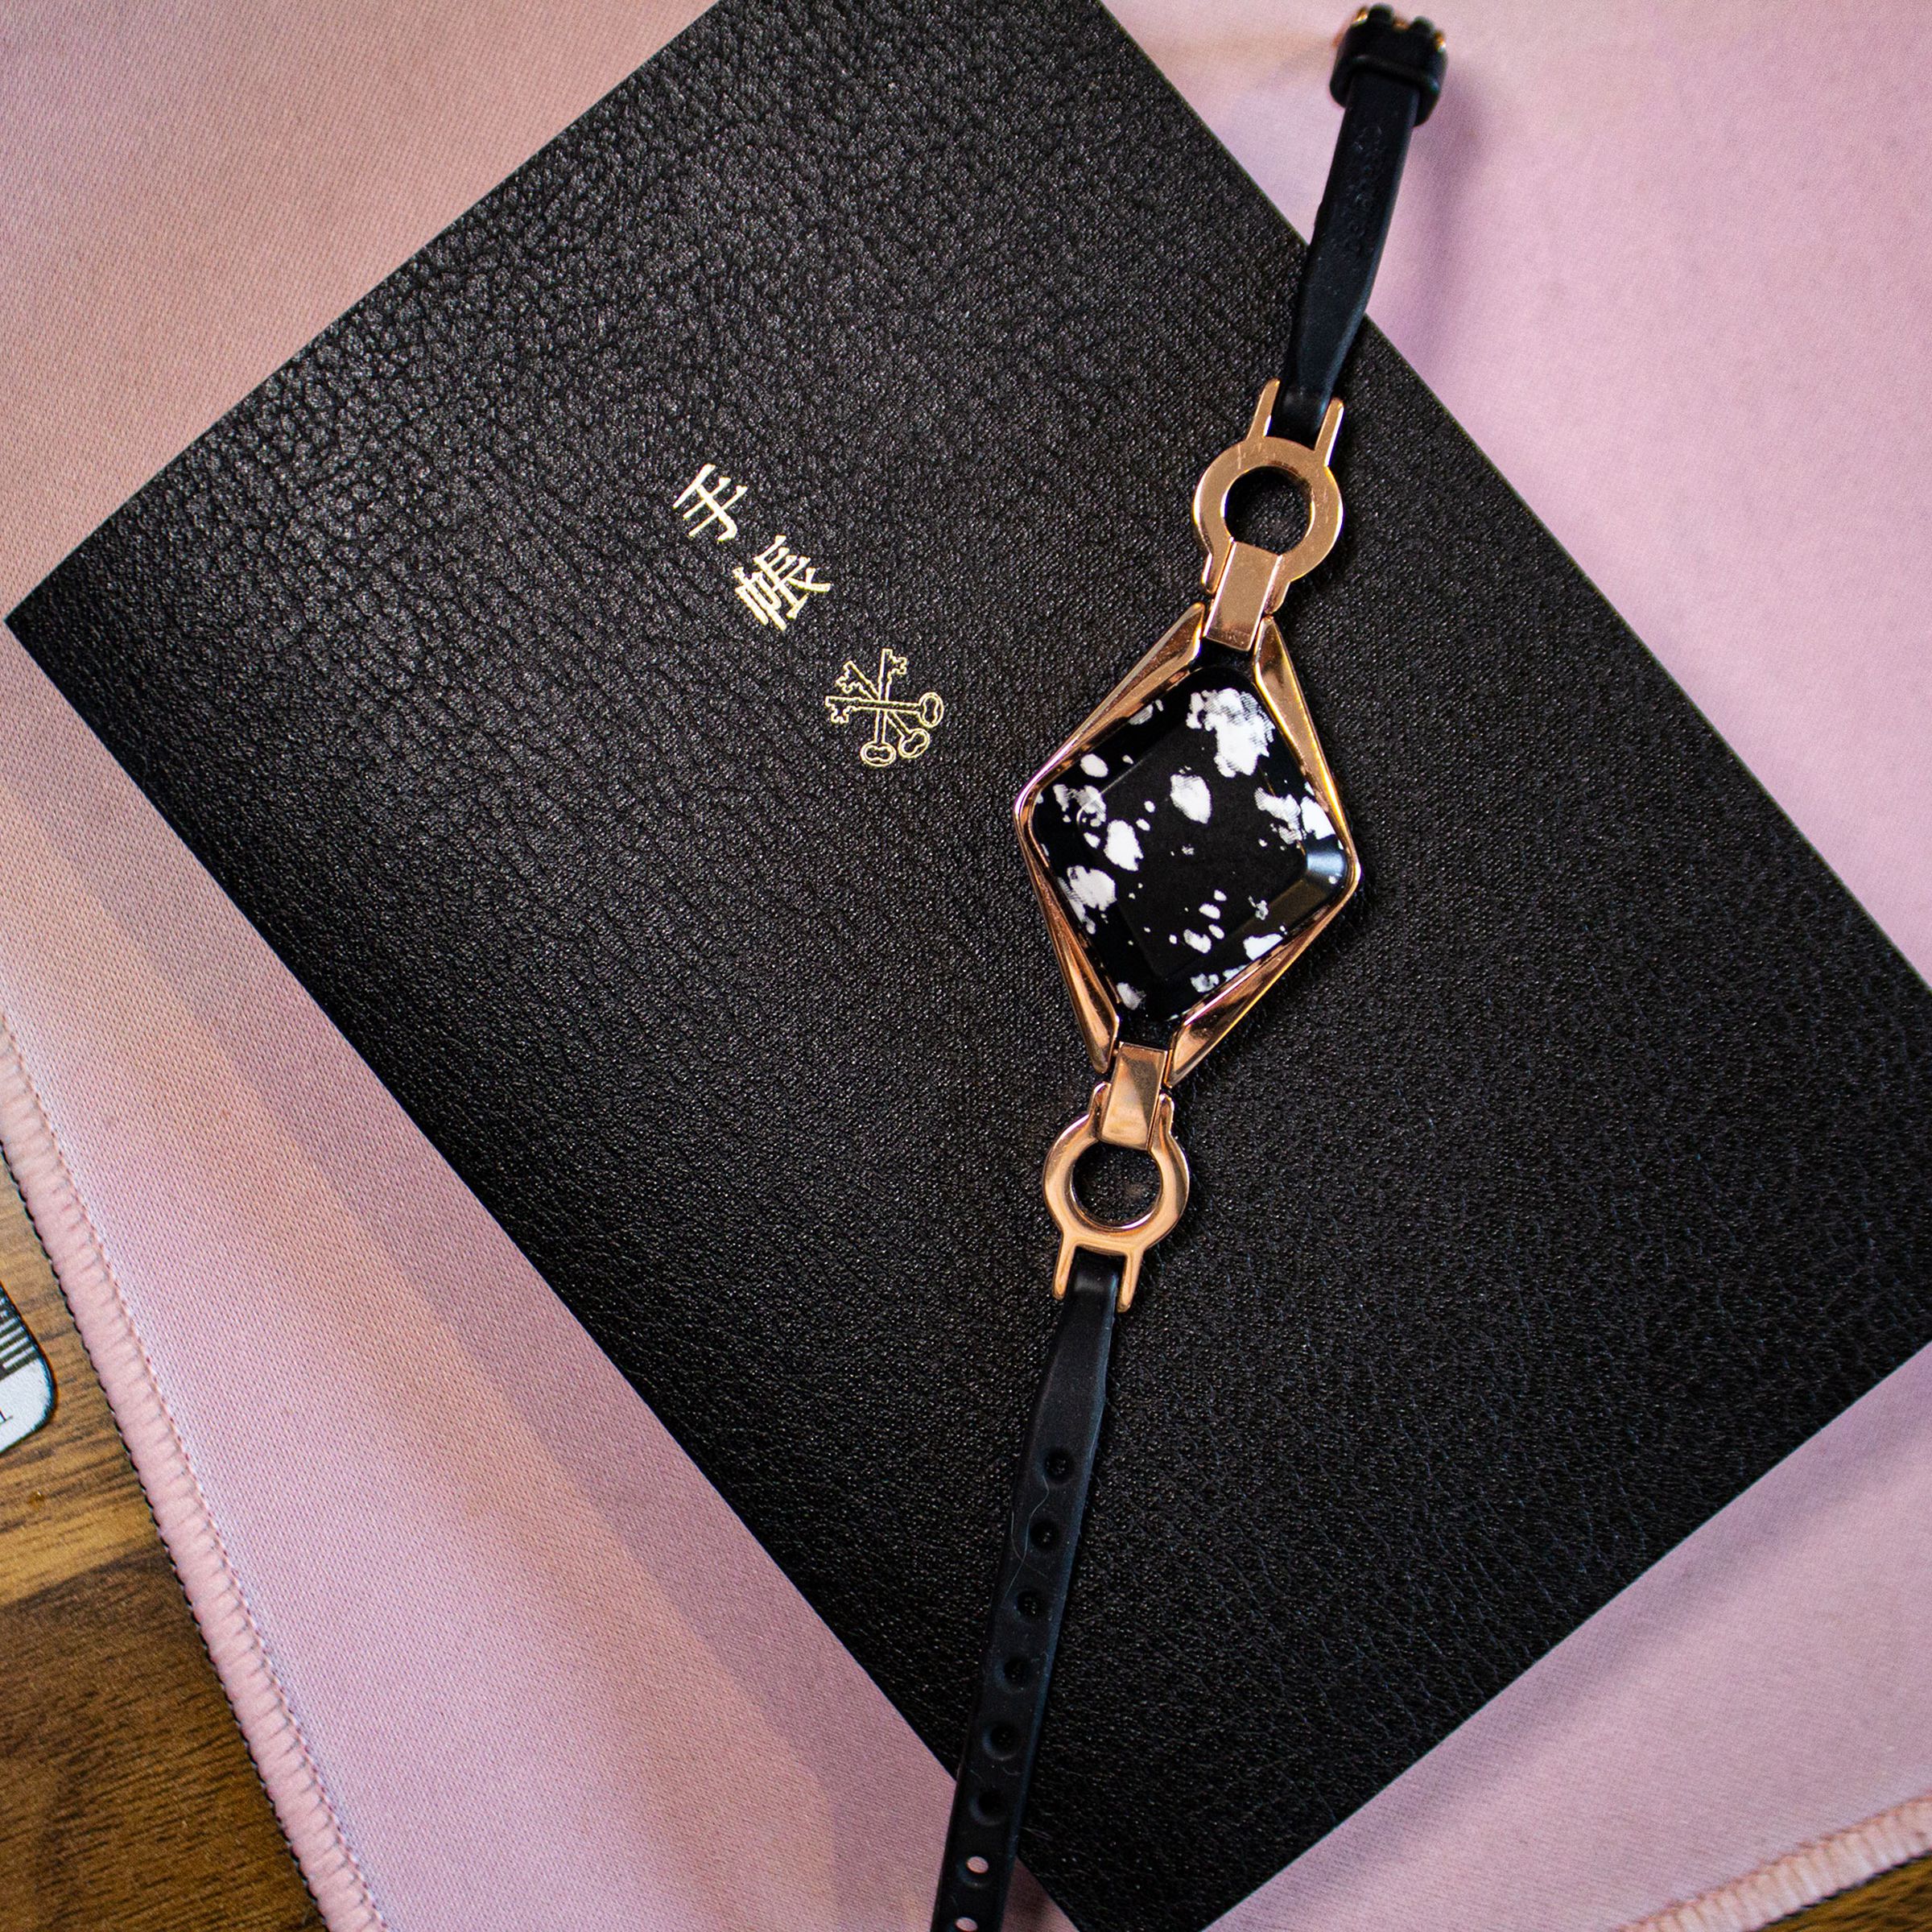 Bellabeat Ivy with black and white stone and rose gold lugs on top of a black notebook and pink desk pad